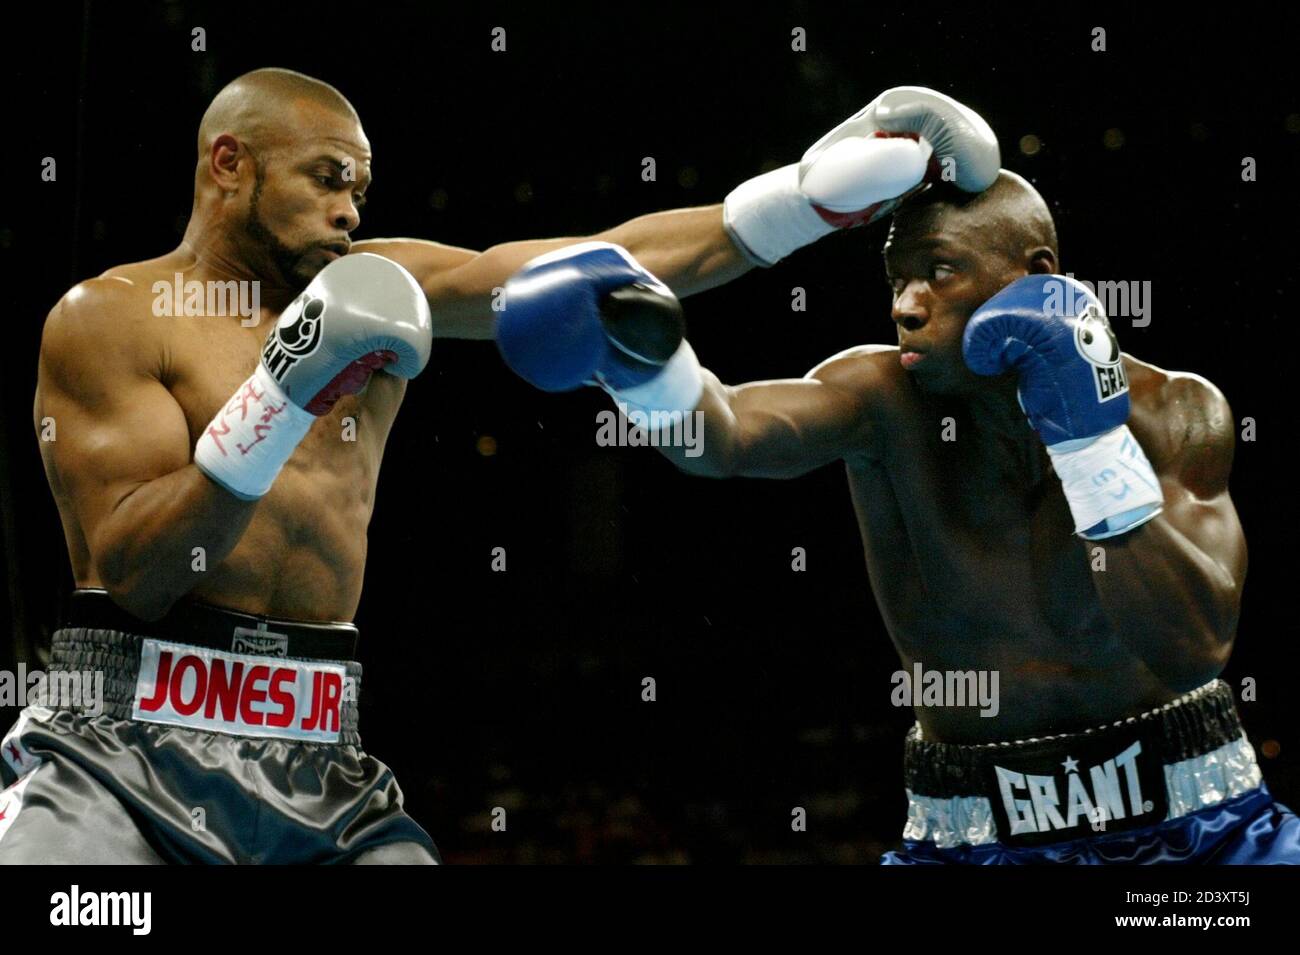 WBC light heavyweight champion Roy Jones Jr. (L) of Pensacola, Florida and Antonio Tarver of Orlando, Florida mix it up in the second round of their title fight at the Mandalay Bay Events Center in Las Vegas, Nevada, May 15, 2004. Tarver won the fight after knocking out Jones later in the round. Stock Photo